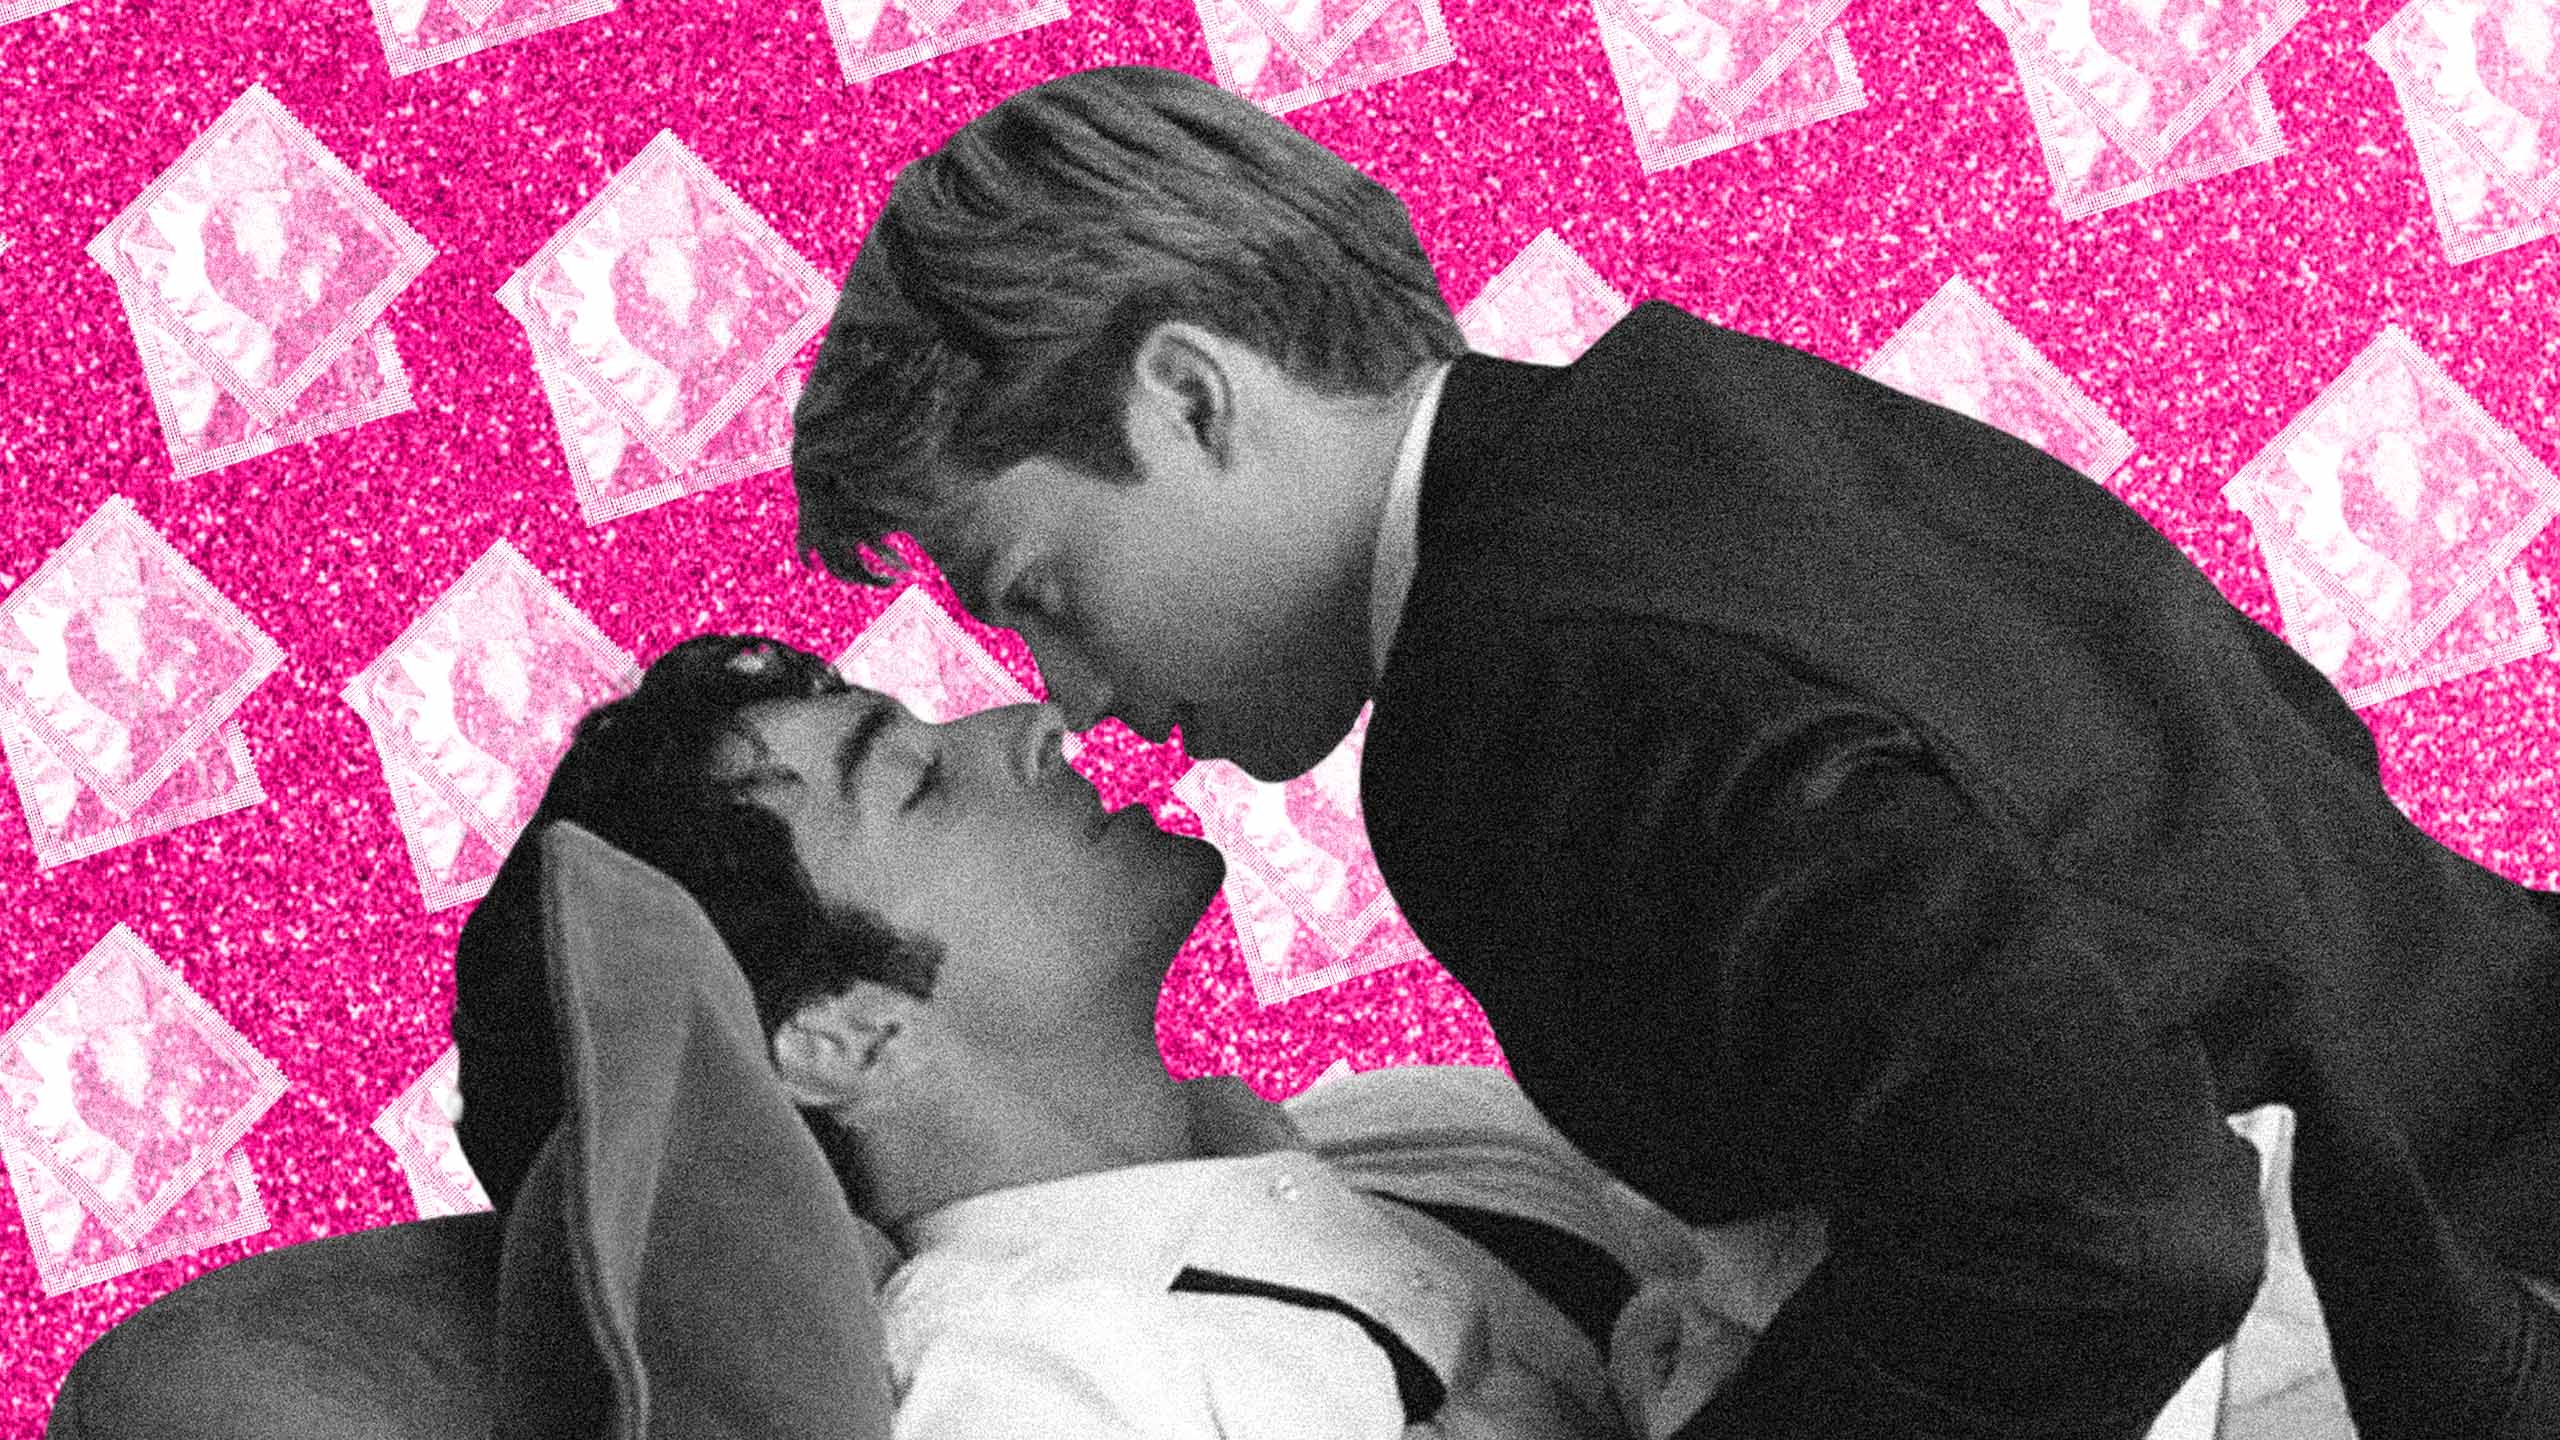 Red, White, and Royal Blue sparks debate over how Hollywood depicts queer sex in film Xtra Magazine pic